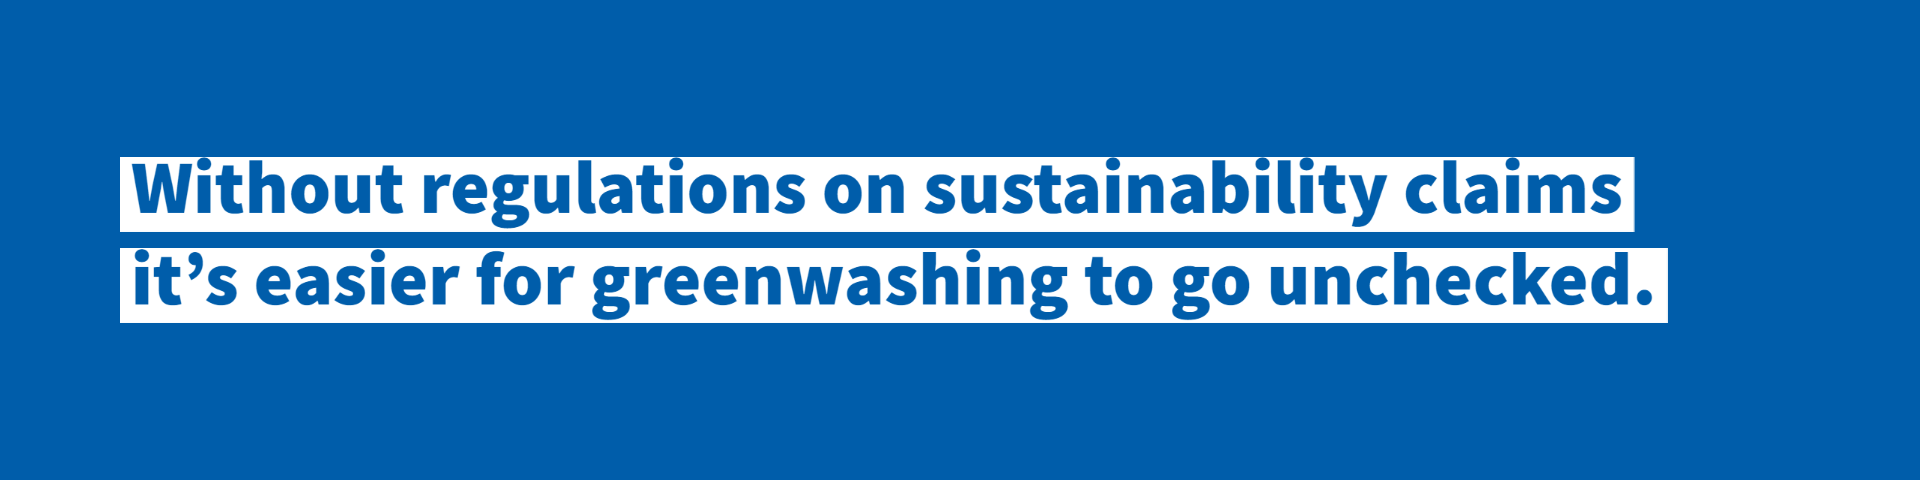 Without regulations on sustainability claims it's easier for greenwashing to go unchecked.